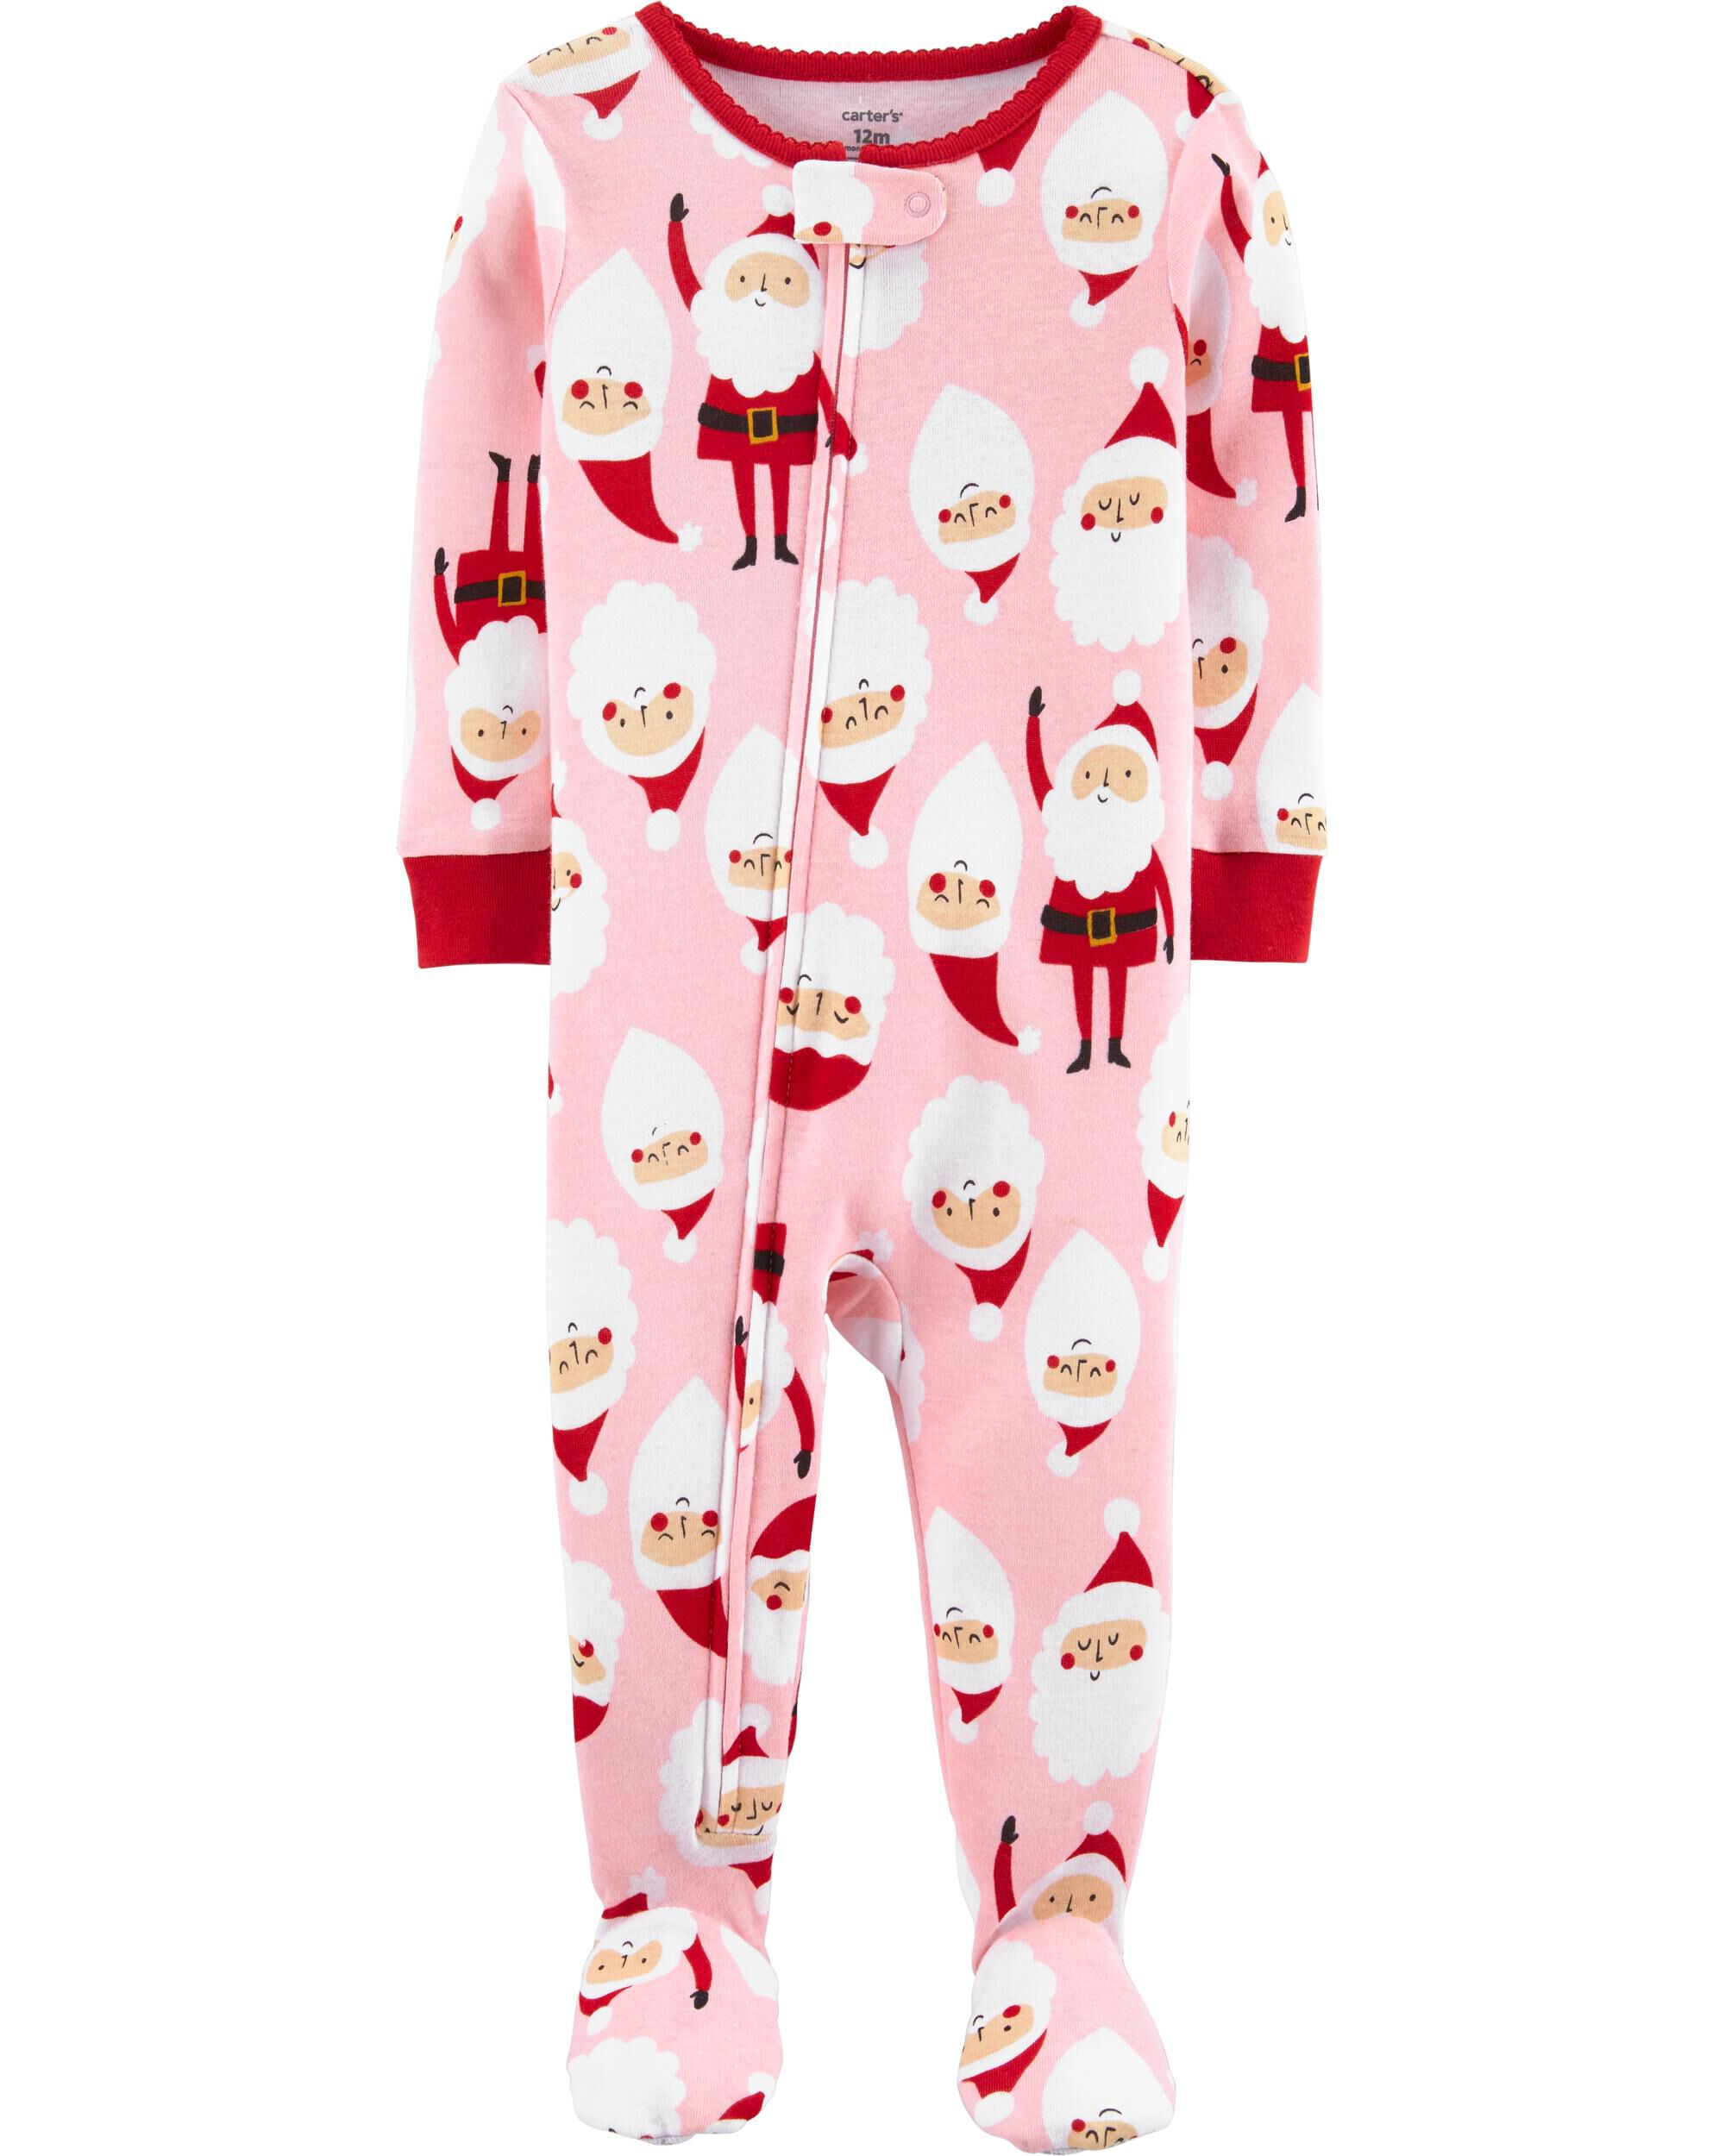 Details about   NWT CARTER'S ON THE NICE LIST FOOTED PAJAMAS SIZE 18M SANTA